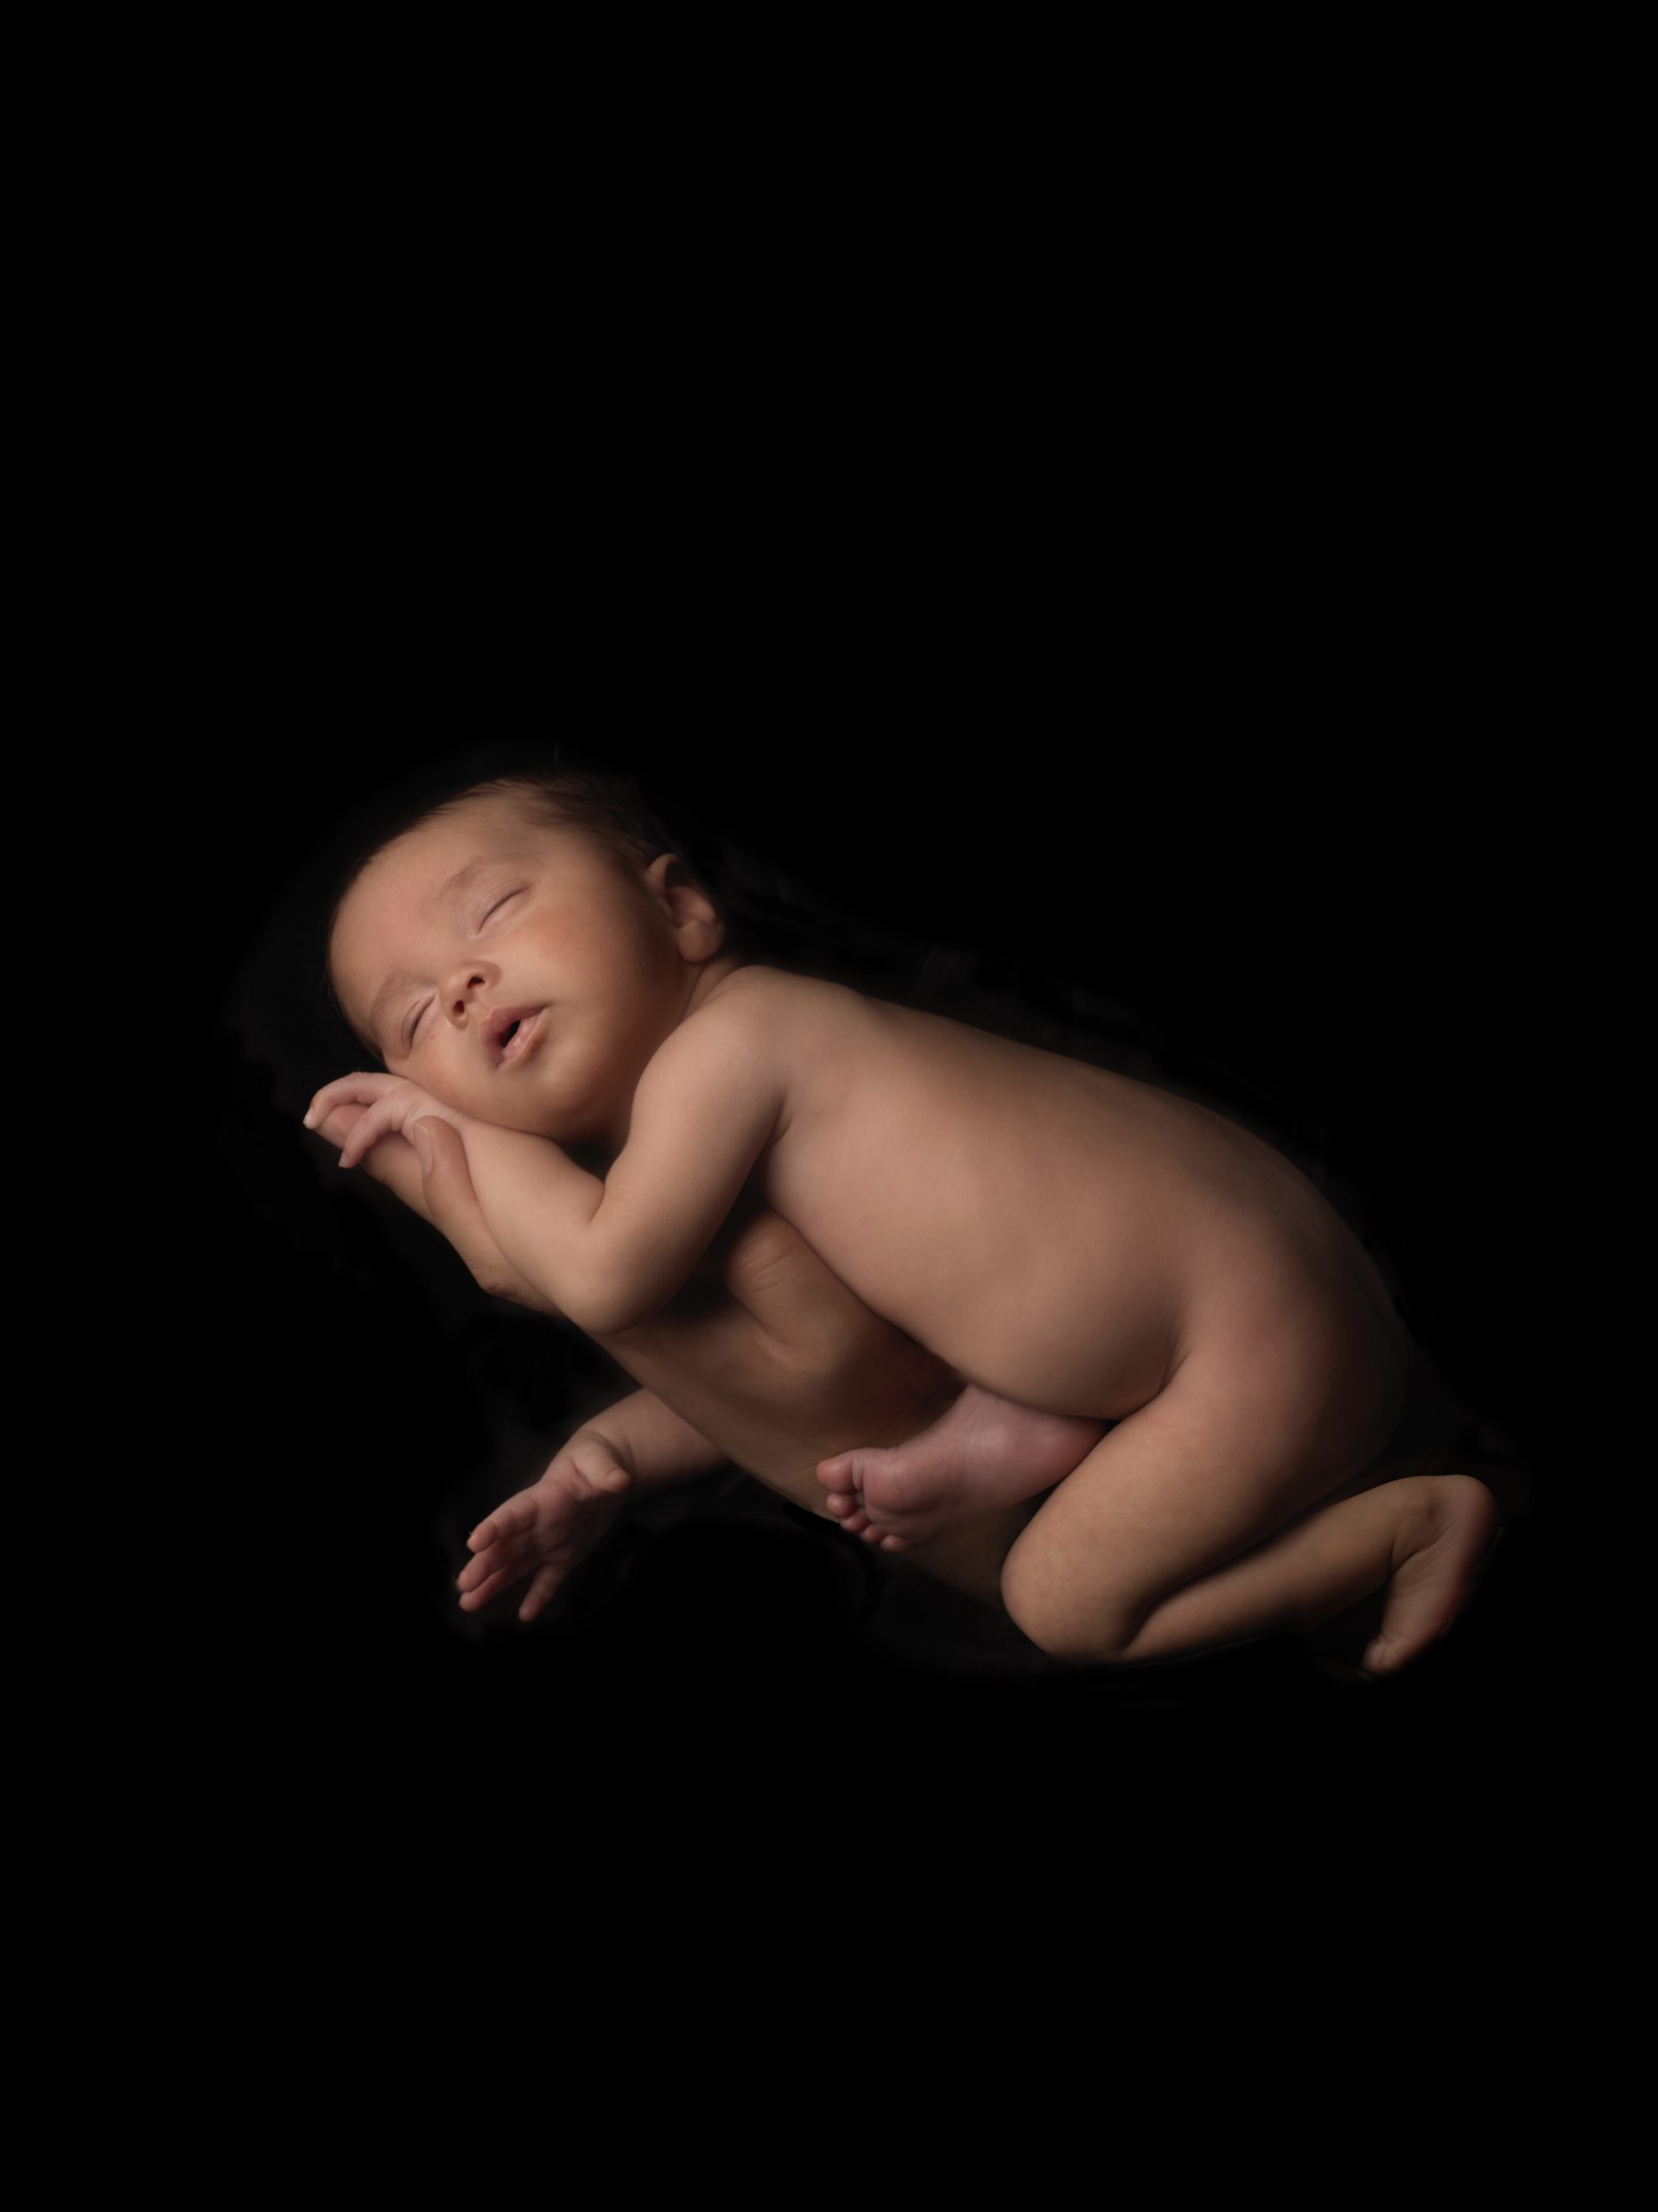 Infant Photography